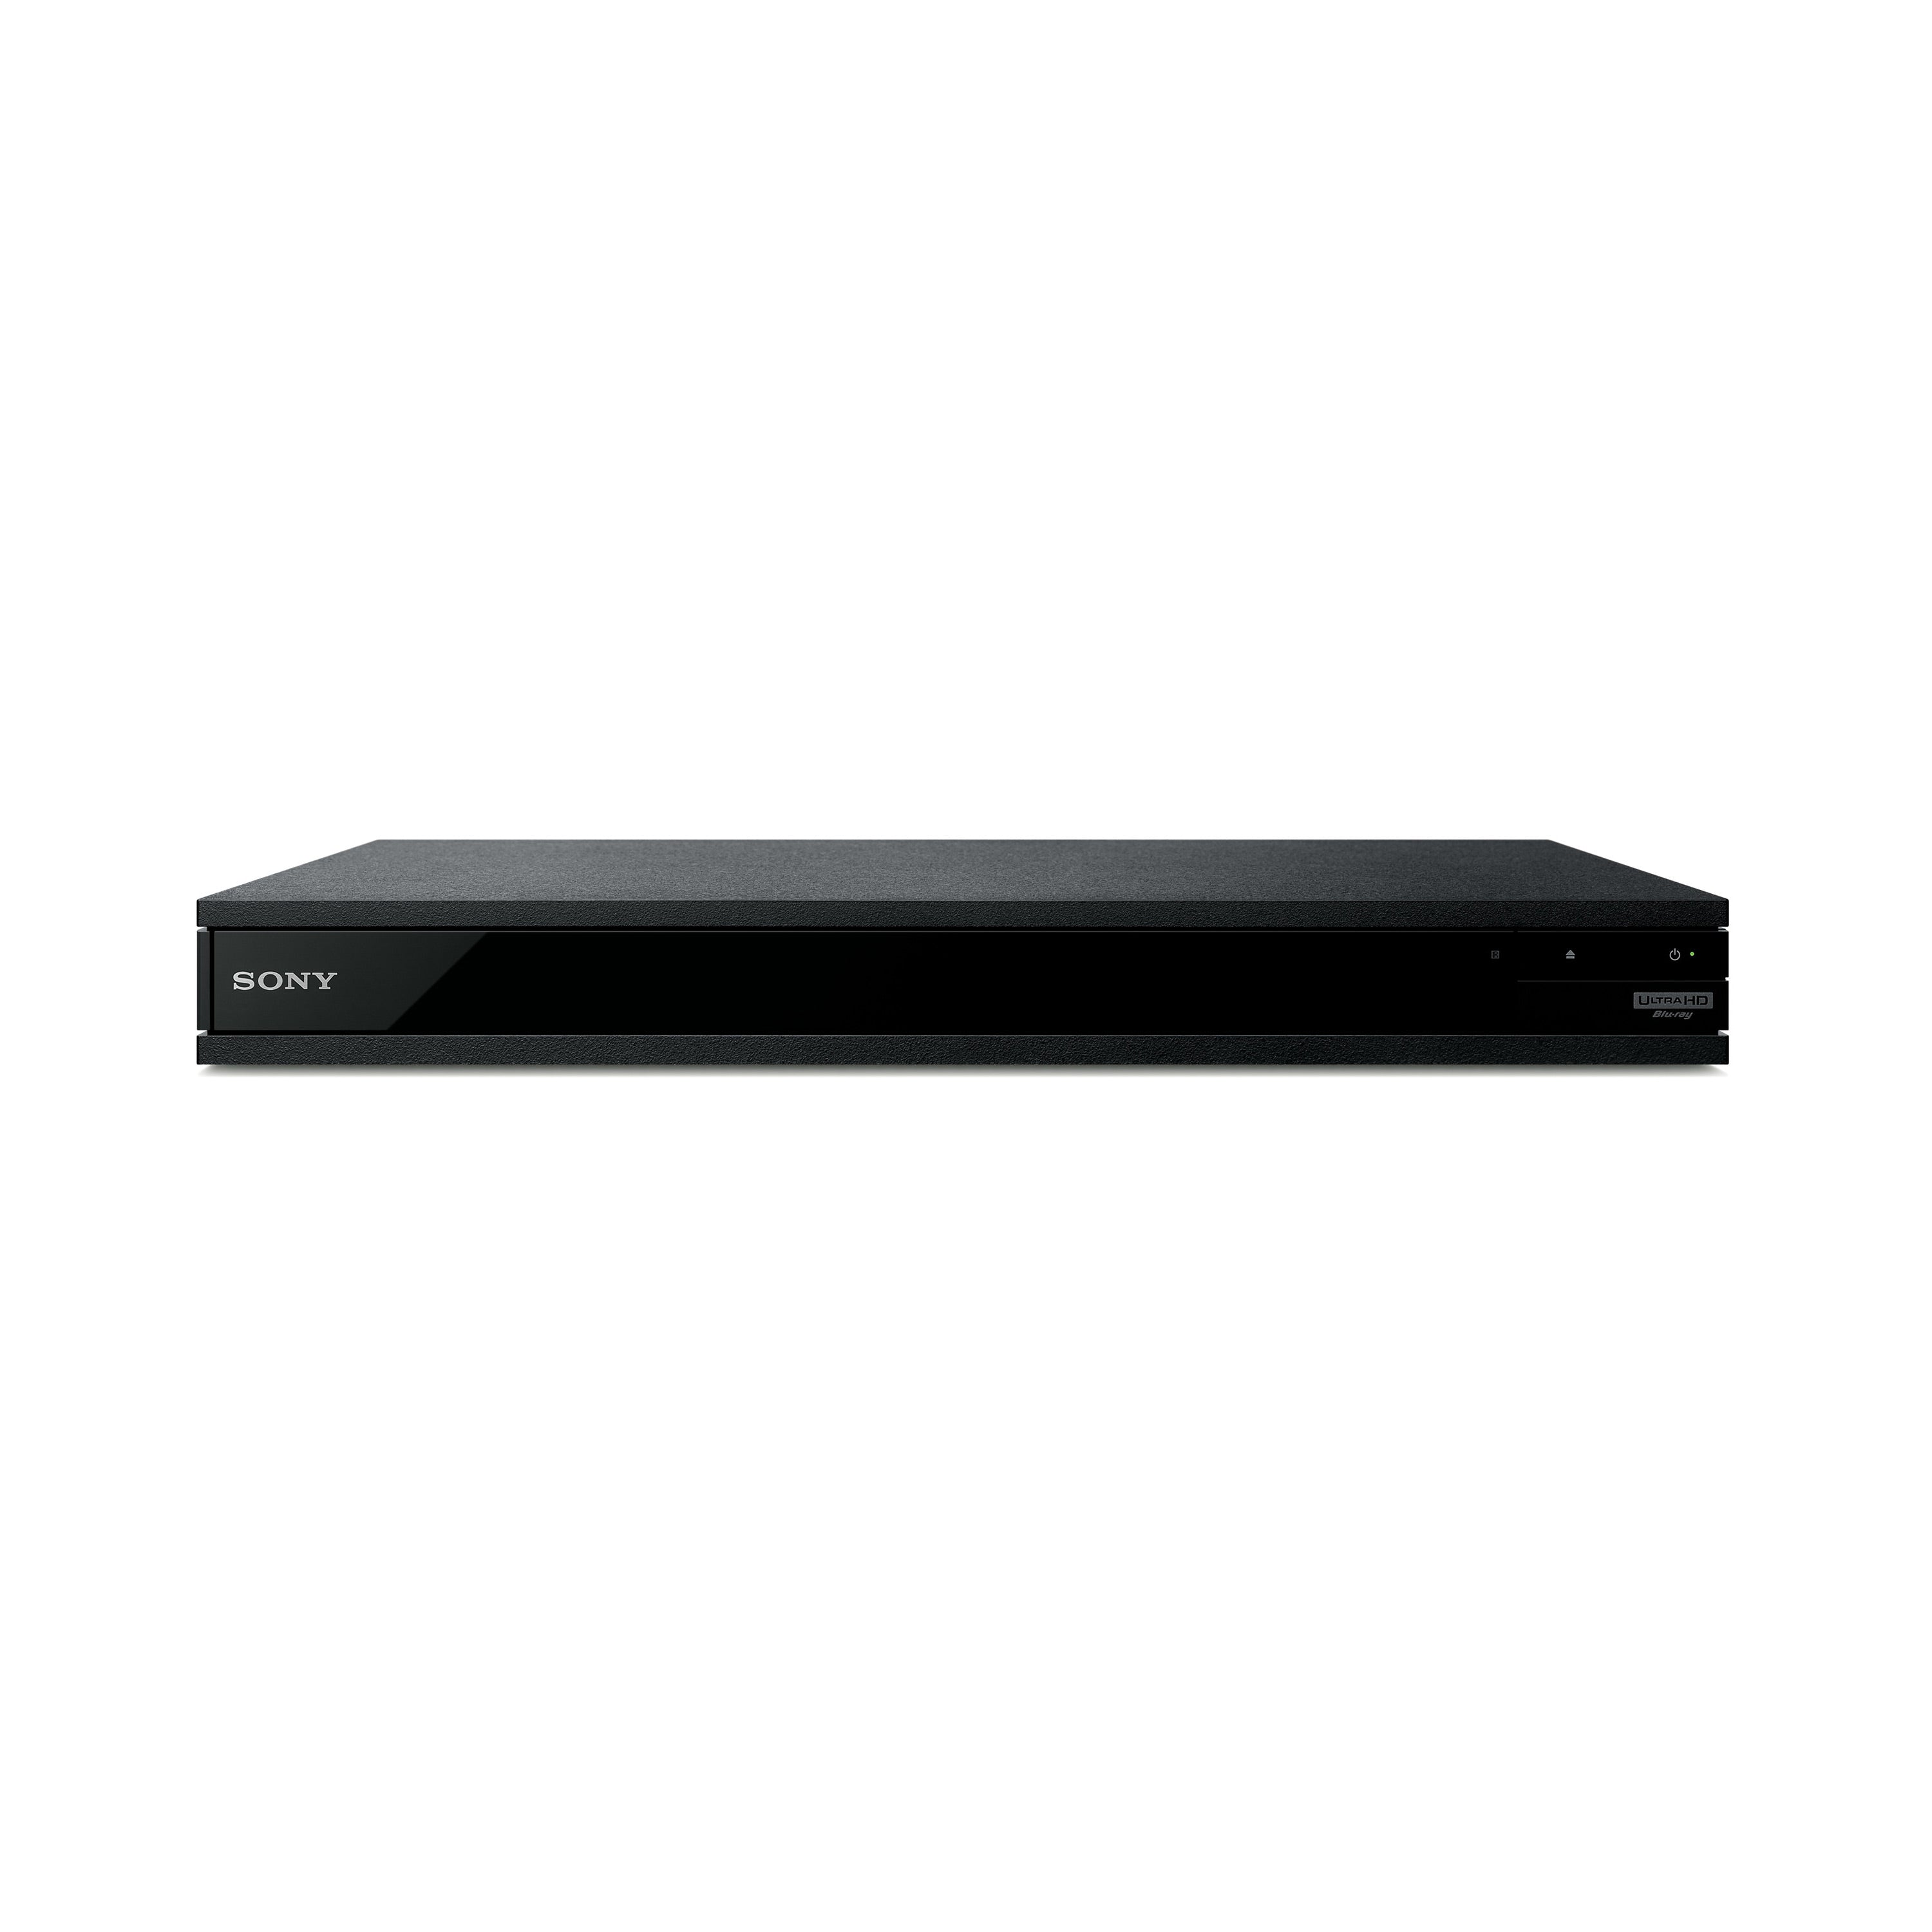 Sony 4K Ultra HD Blu-ray™ Player with Dolby Atmos®, HDR and Wi-Fi for Streaming Video | UBP-X800M2